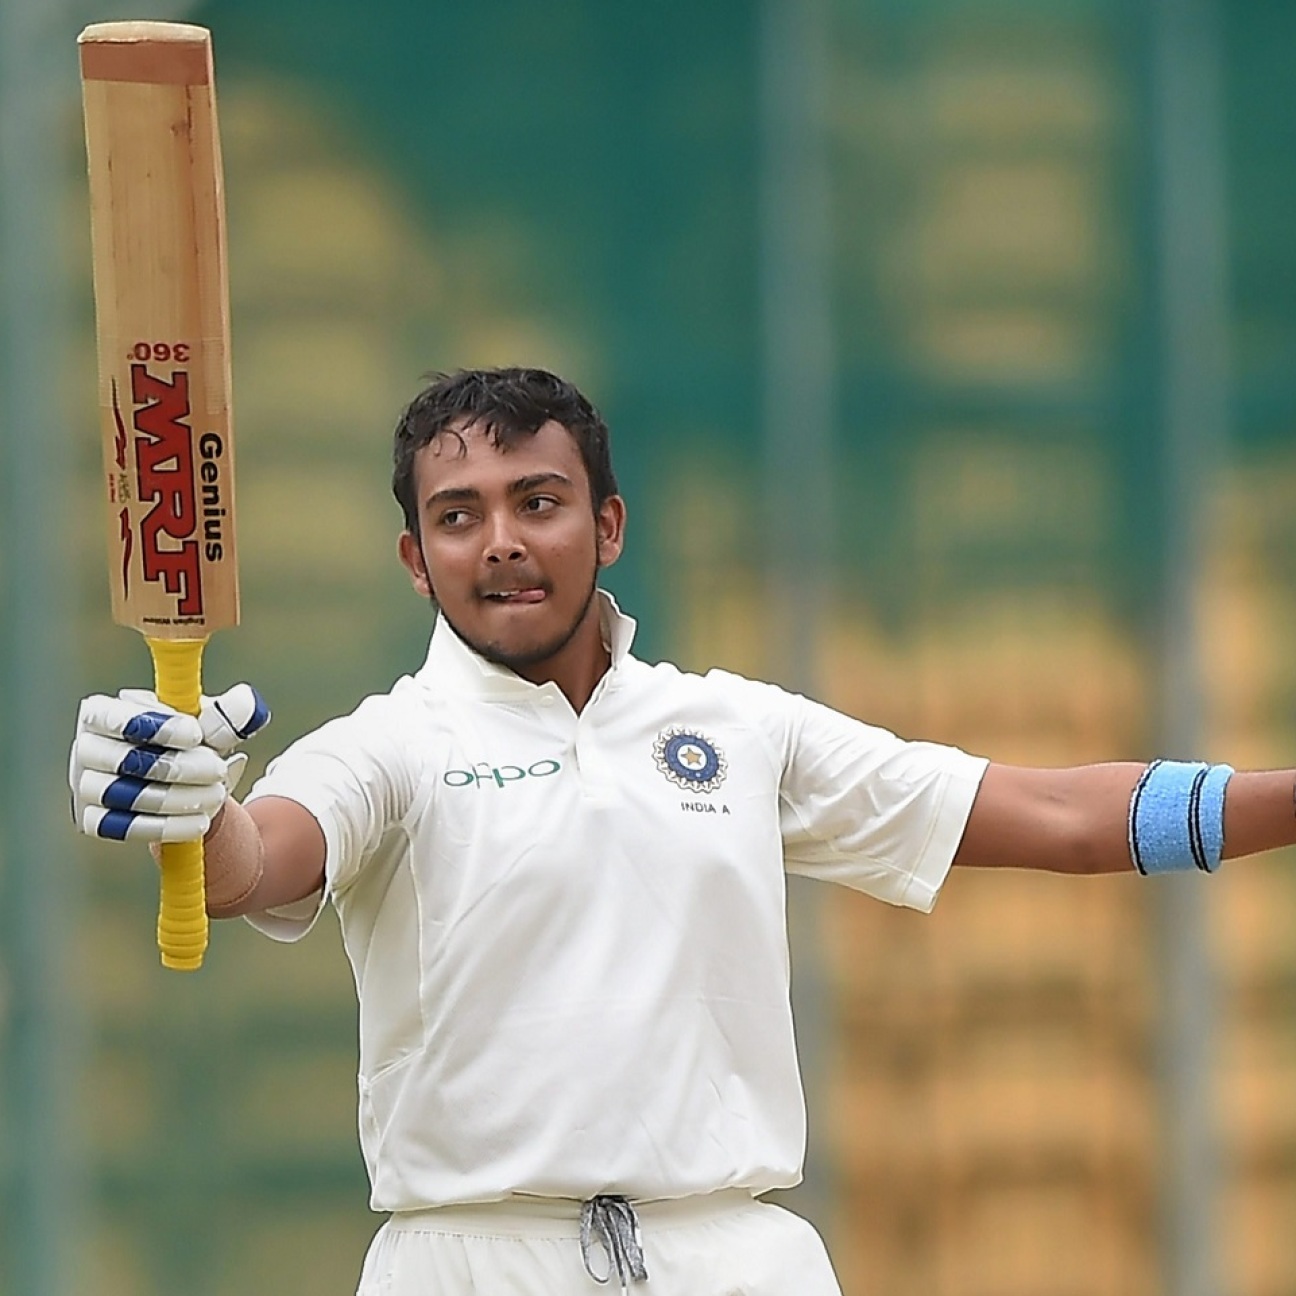 "A WellDeserved Double Hundred" Twitter Reacts To Prithvi Shaw's